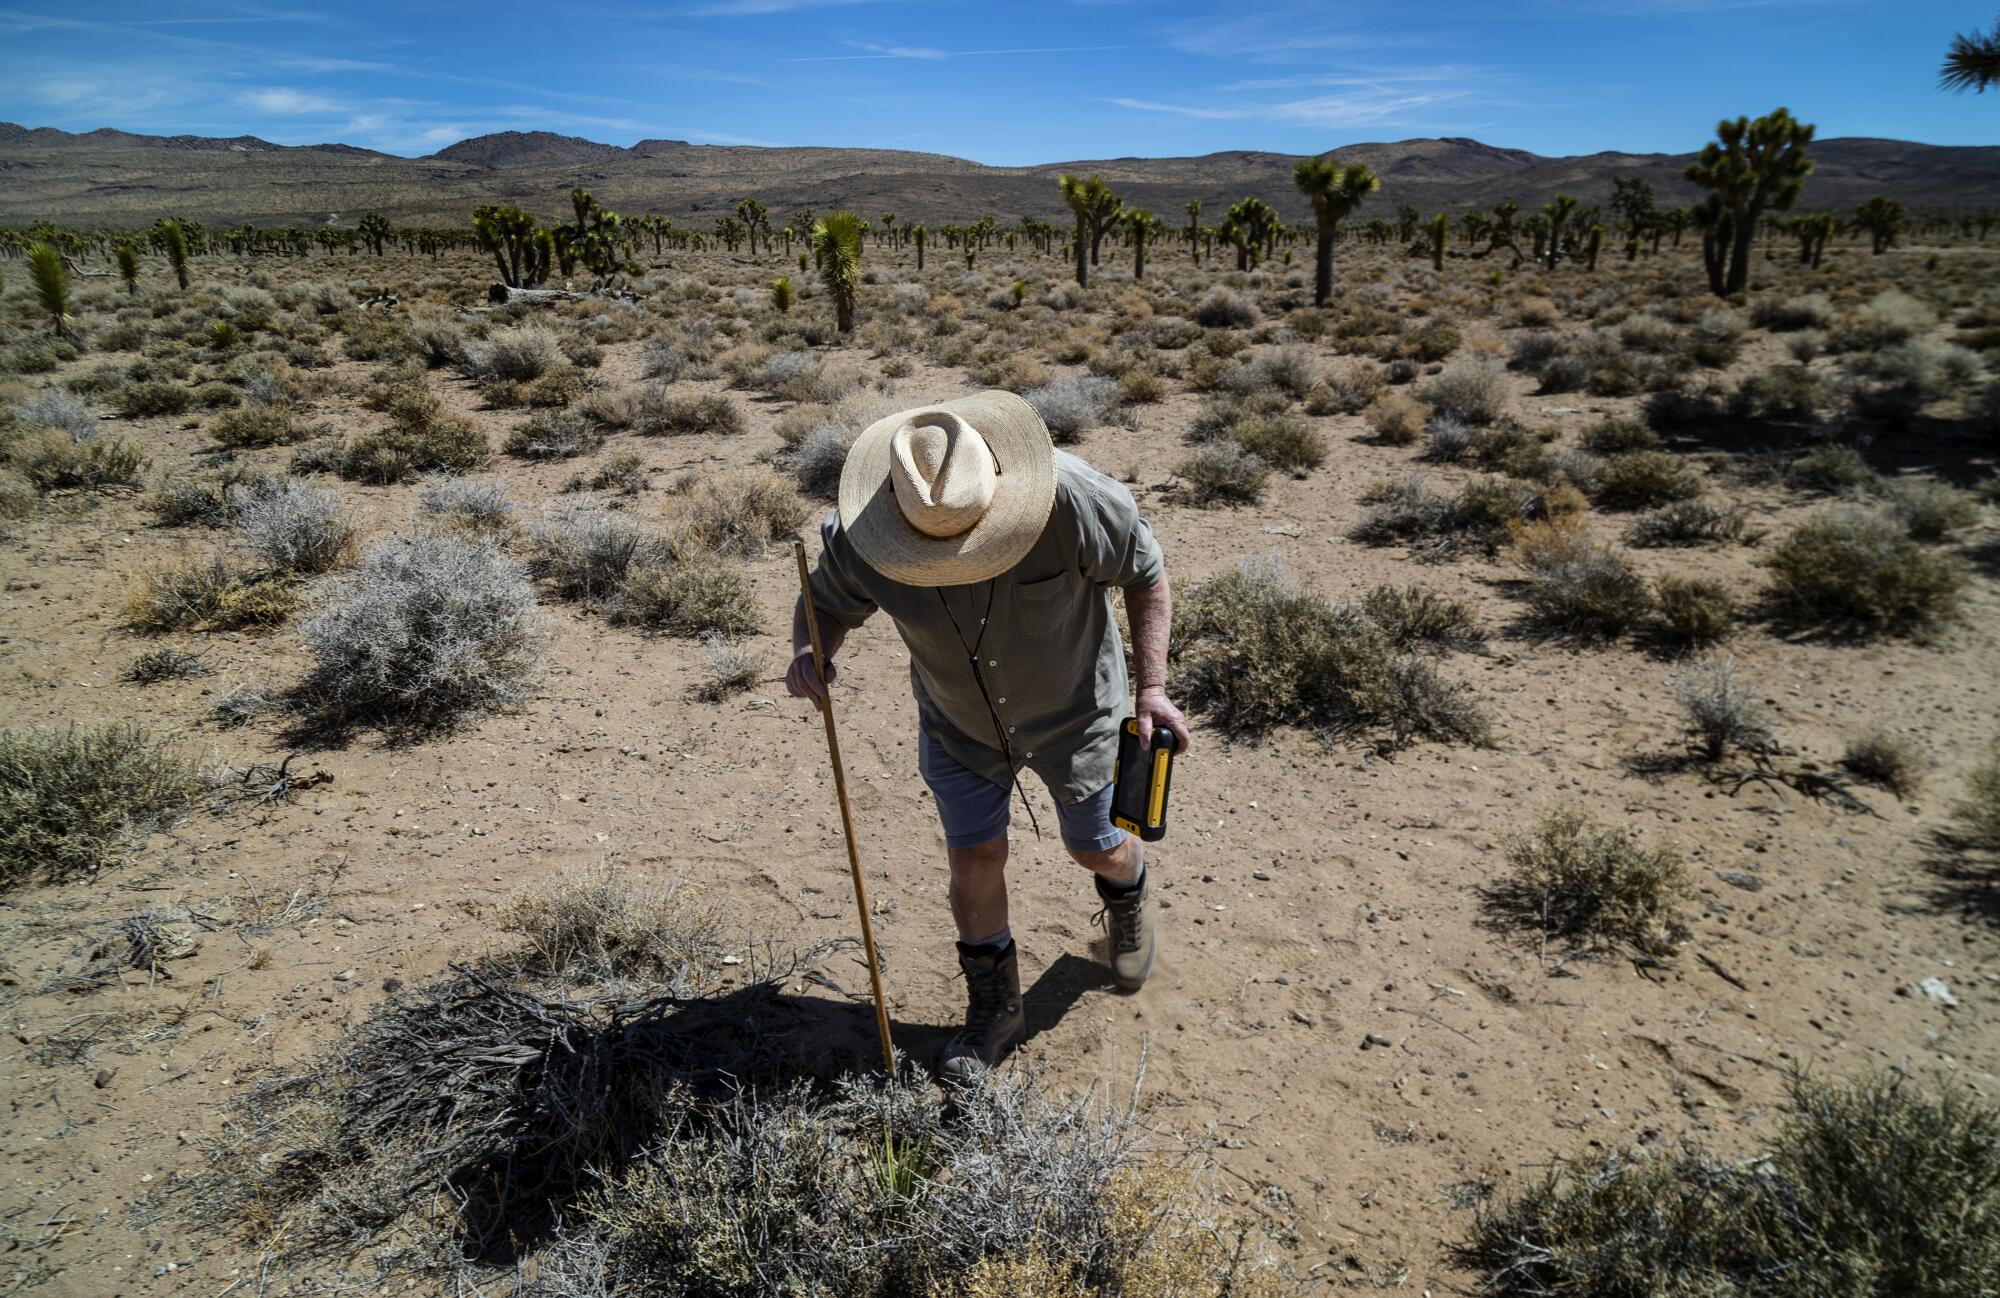 A man pokes a plant in a desert with a stick.